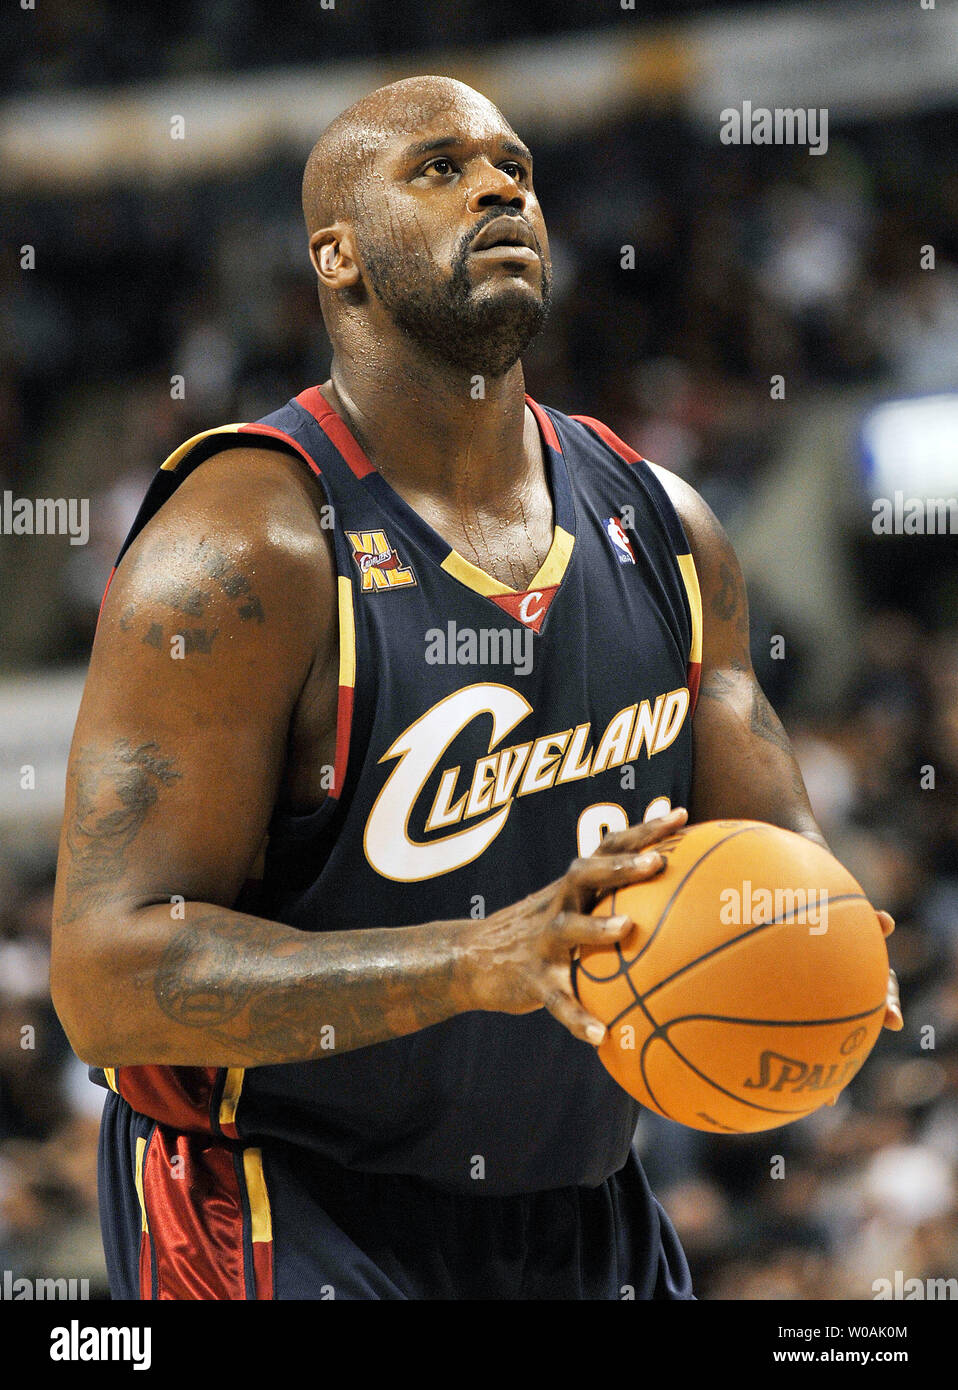 Cleveland Cavaliers' Shaquille O'Neal prepares to take a free throw in  second quarter action of the Toronto Raptors' home opener against his team  at the Air Canada Center in Toronto, Canada on